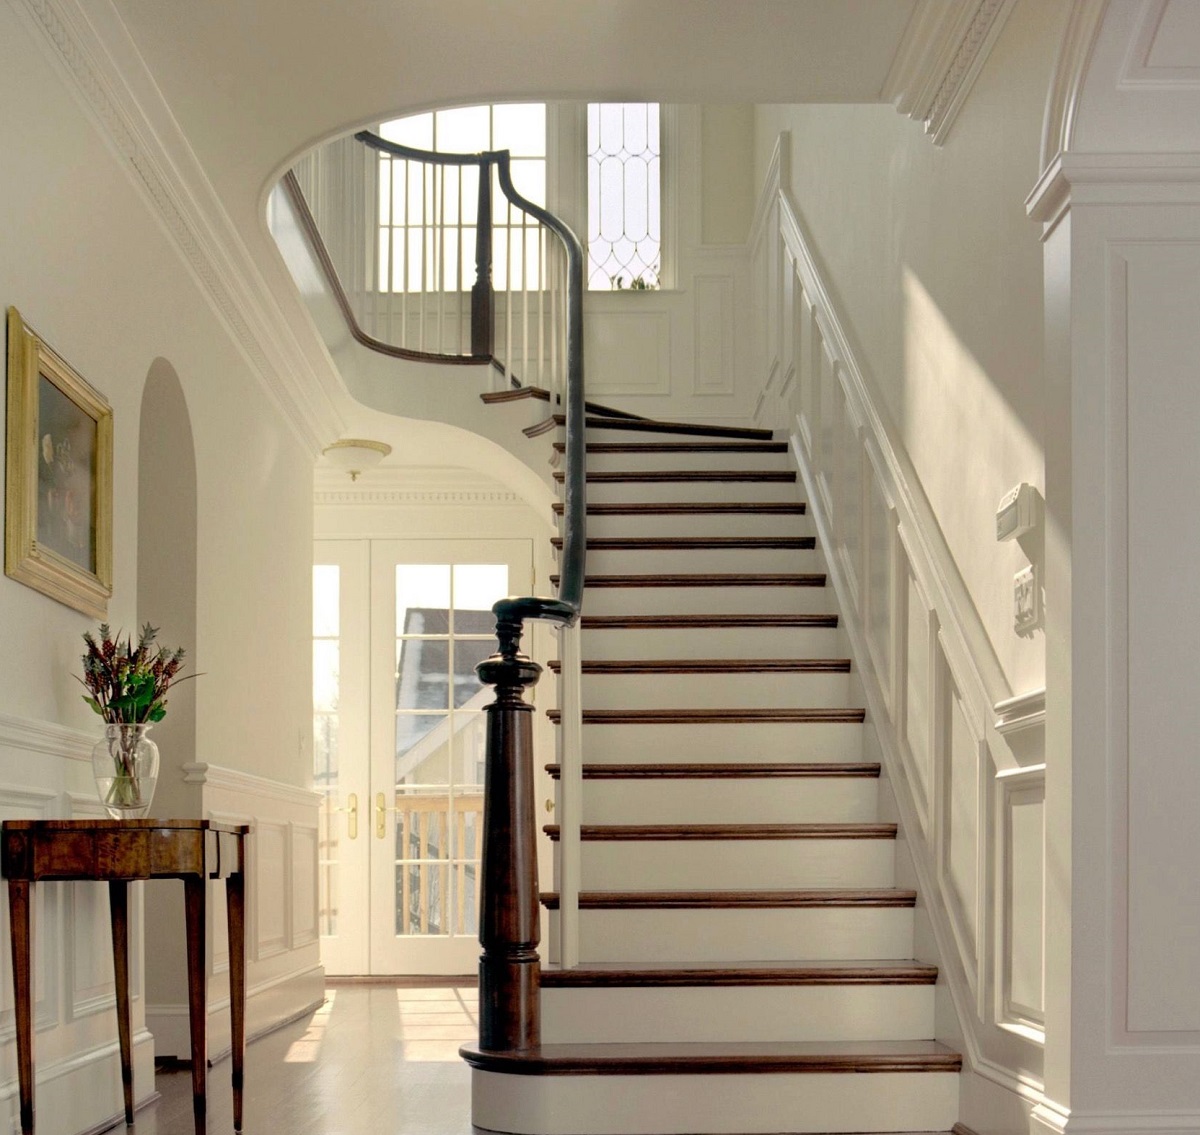 How To Paint A Stairwell: Expert Advice For Painting Your Home’s Tallest Space